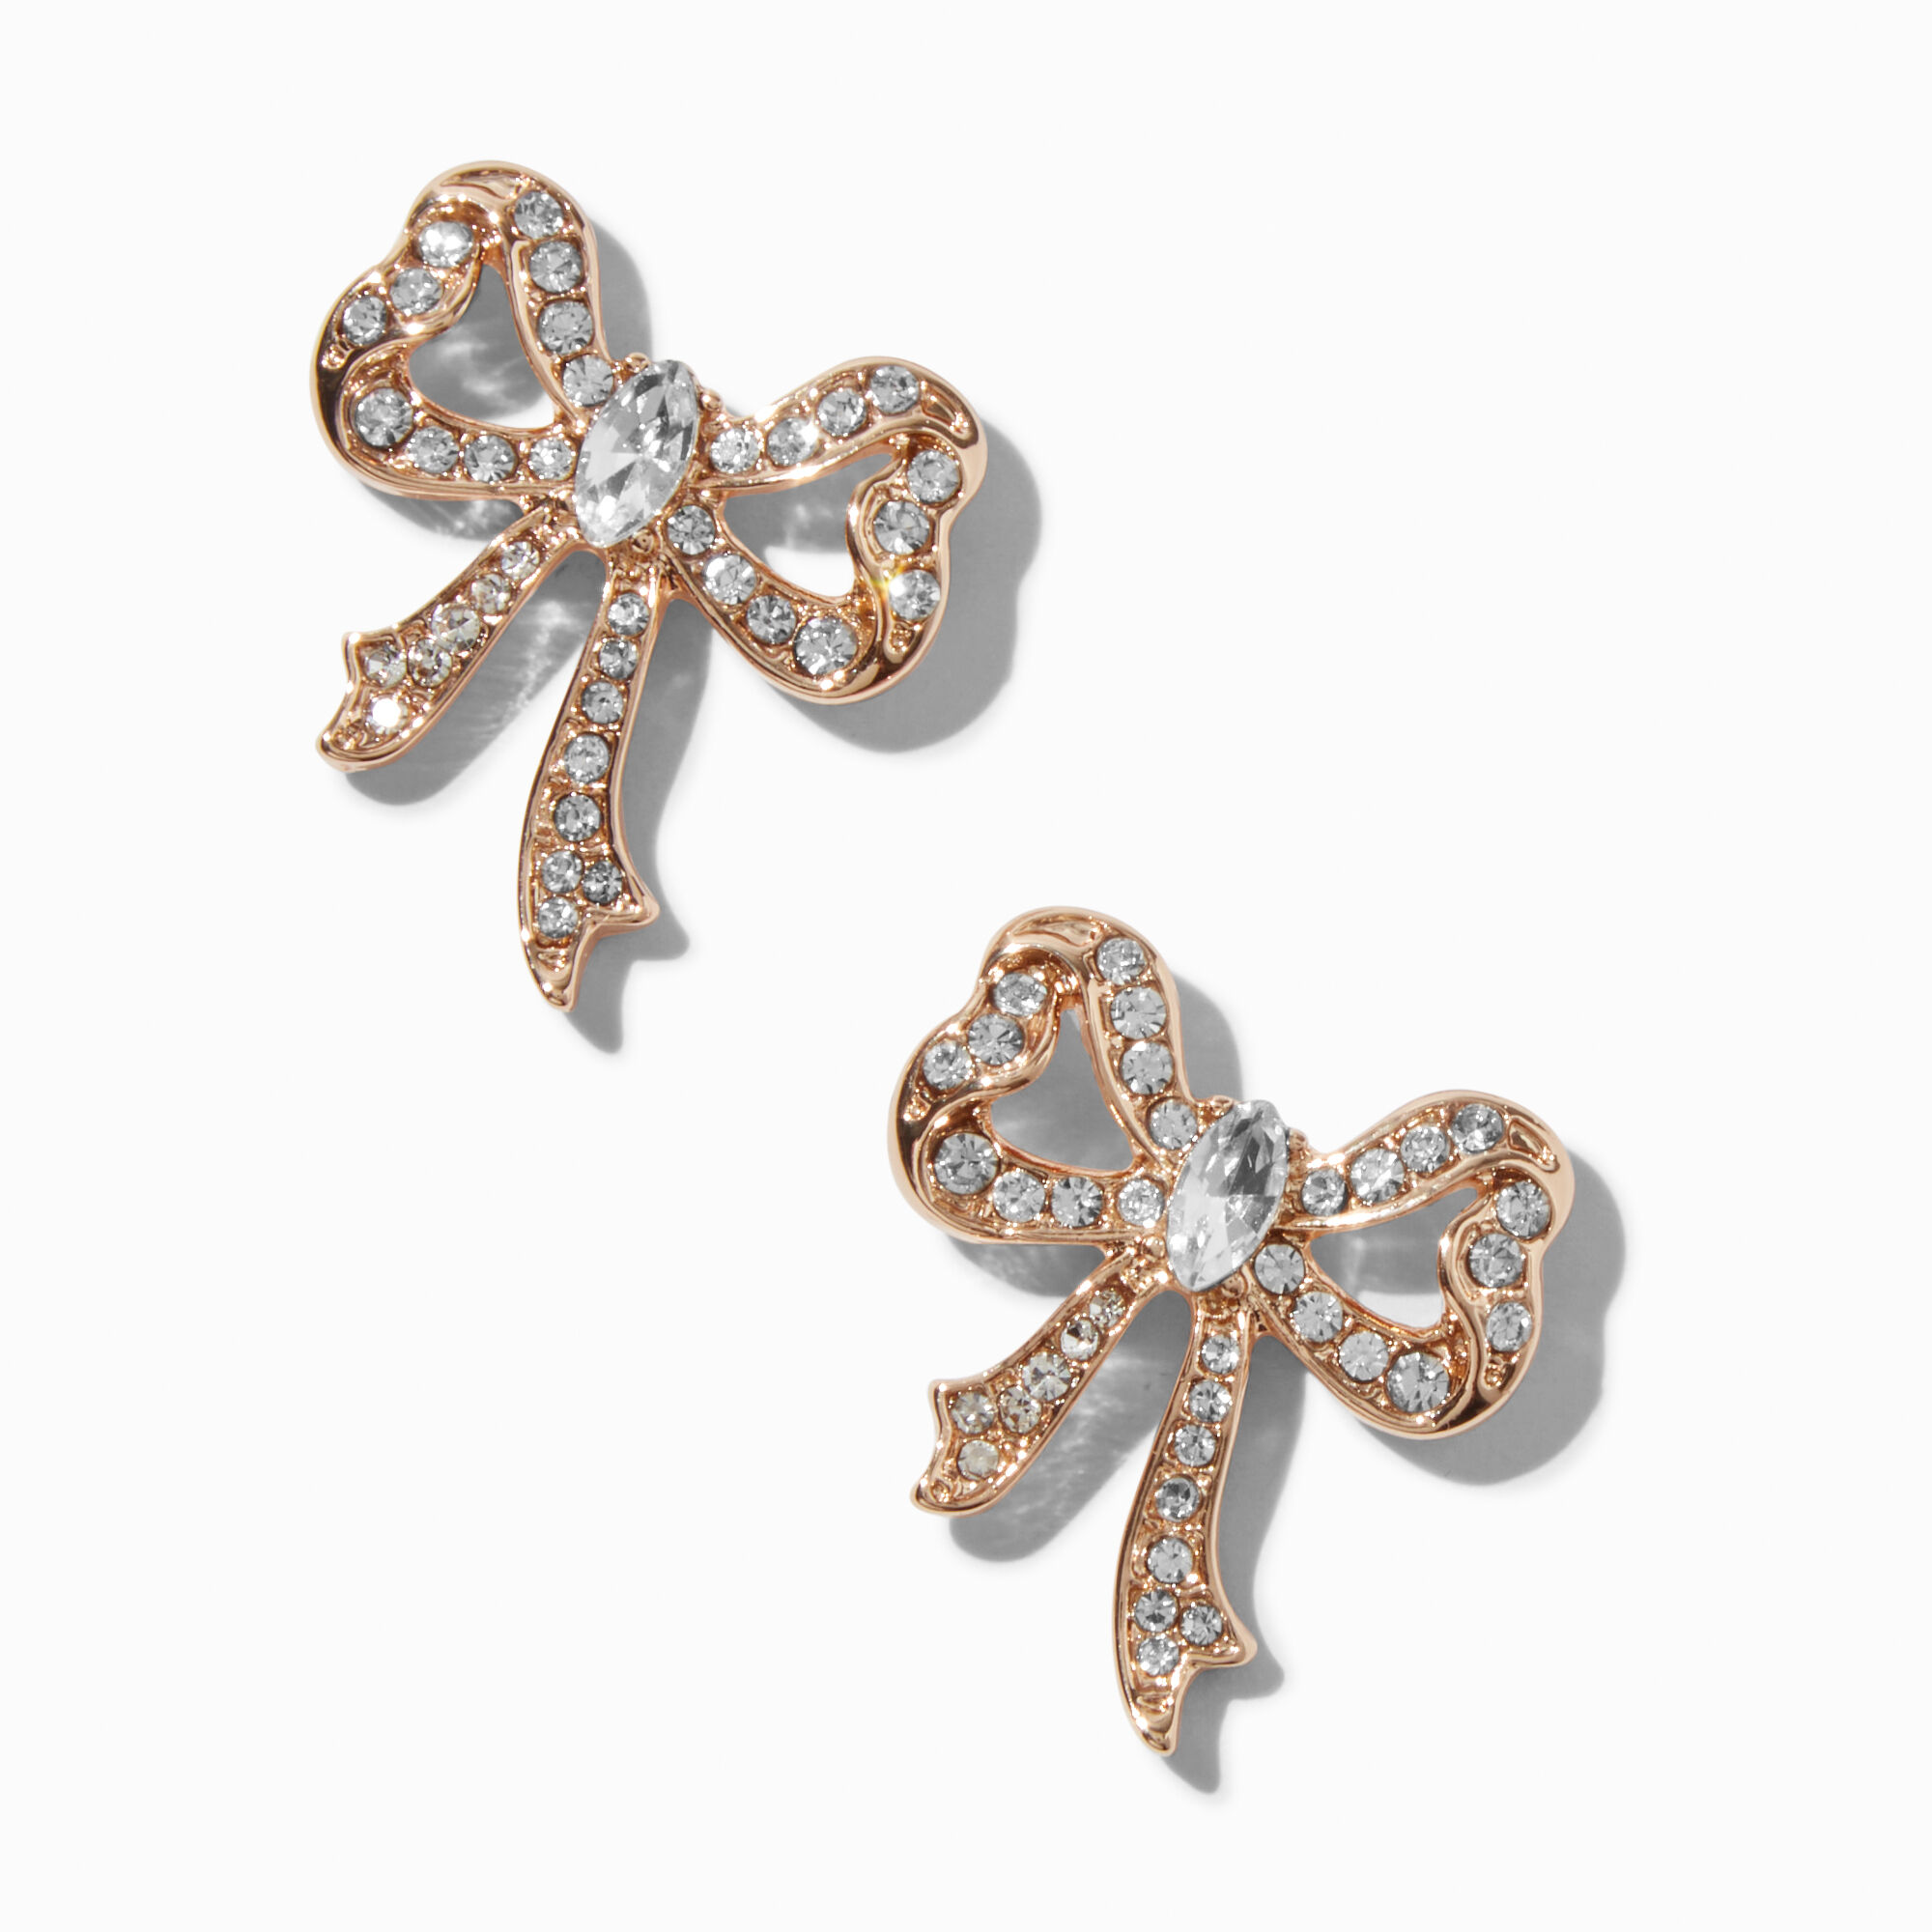 View Claires Tone Crystal Bow Stud Earrings Gold information